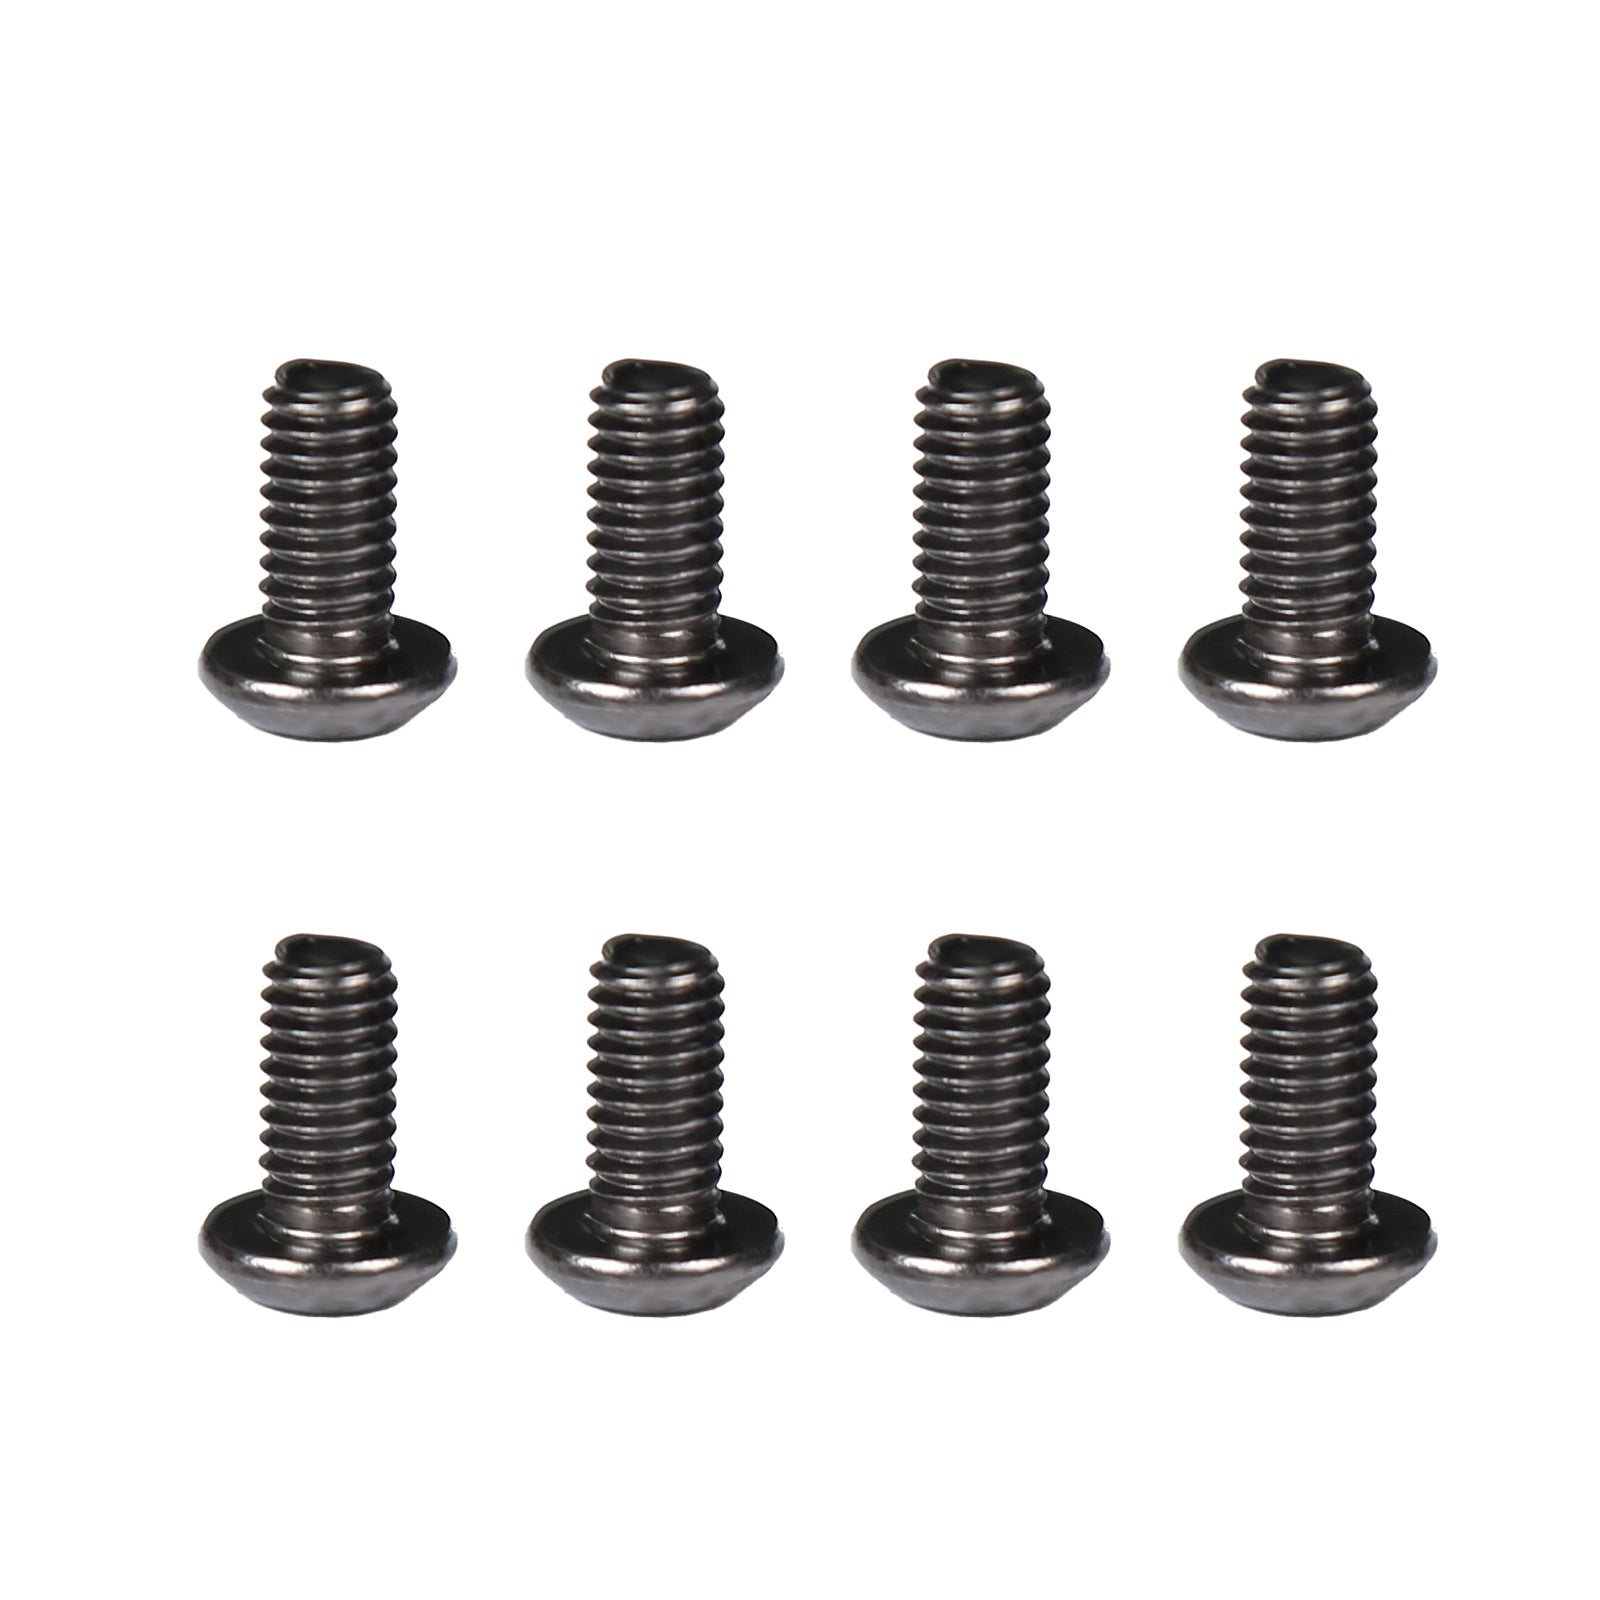 OMP HOBBY M7 Helicopter Parts Button Head Screw M4x8 OSHM7101